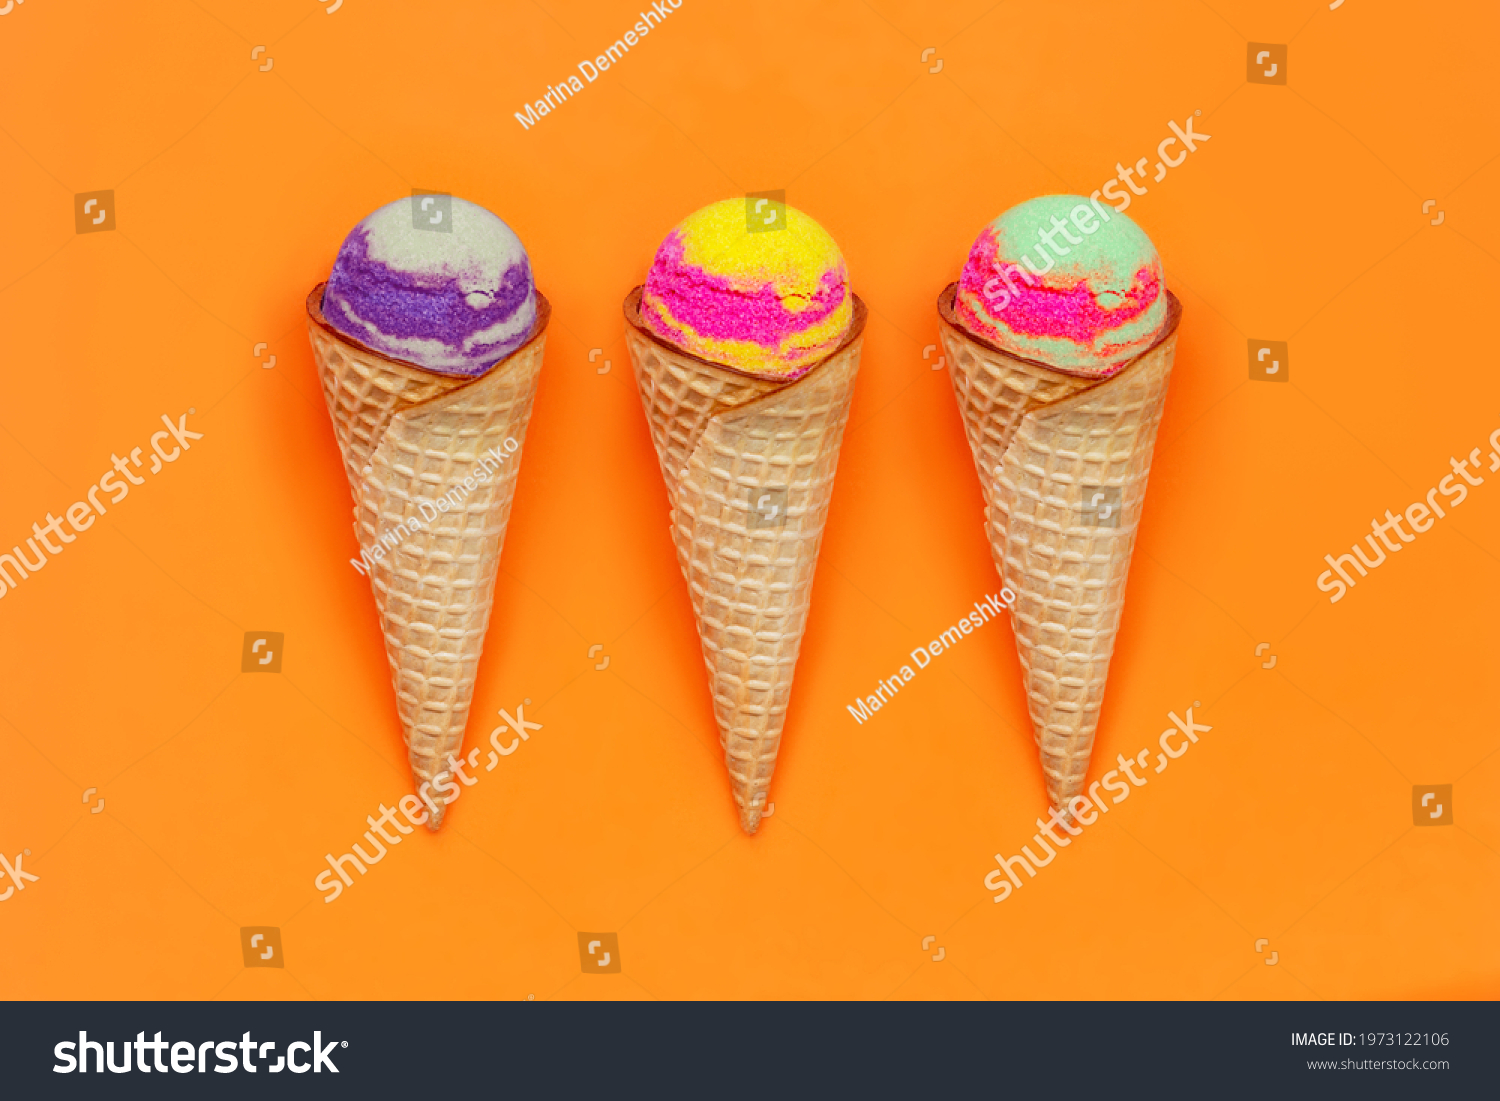 Set of three types of sweet multicolored sorbet ice-cream in a waffle cones with different fruit and berry flavors isolated on a color bright orange background. Summer concept #1973122106